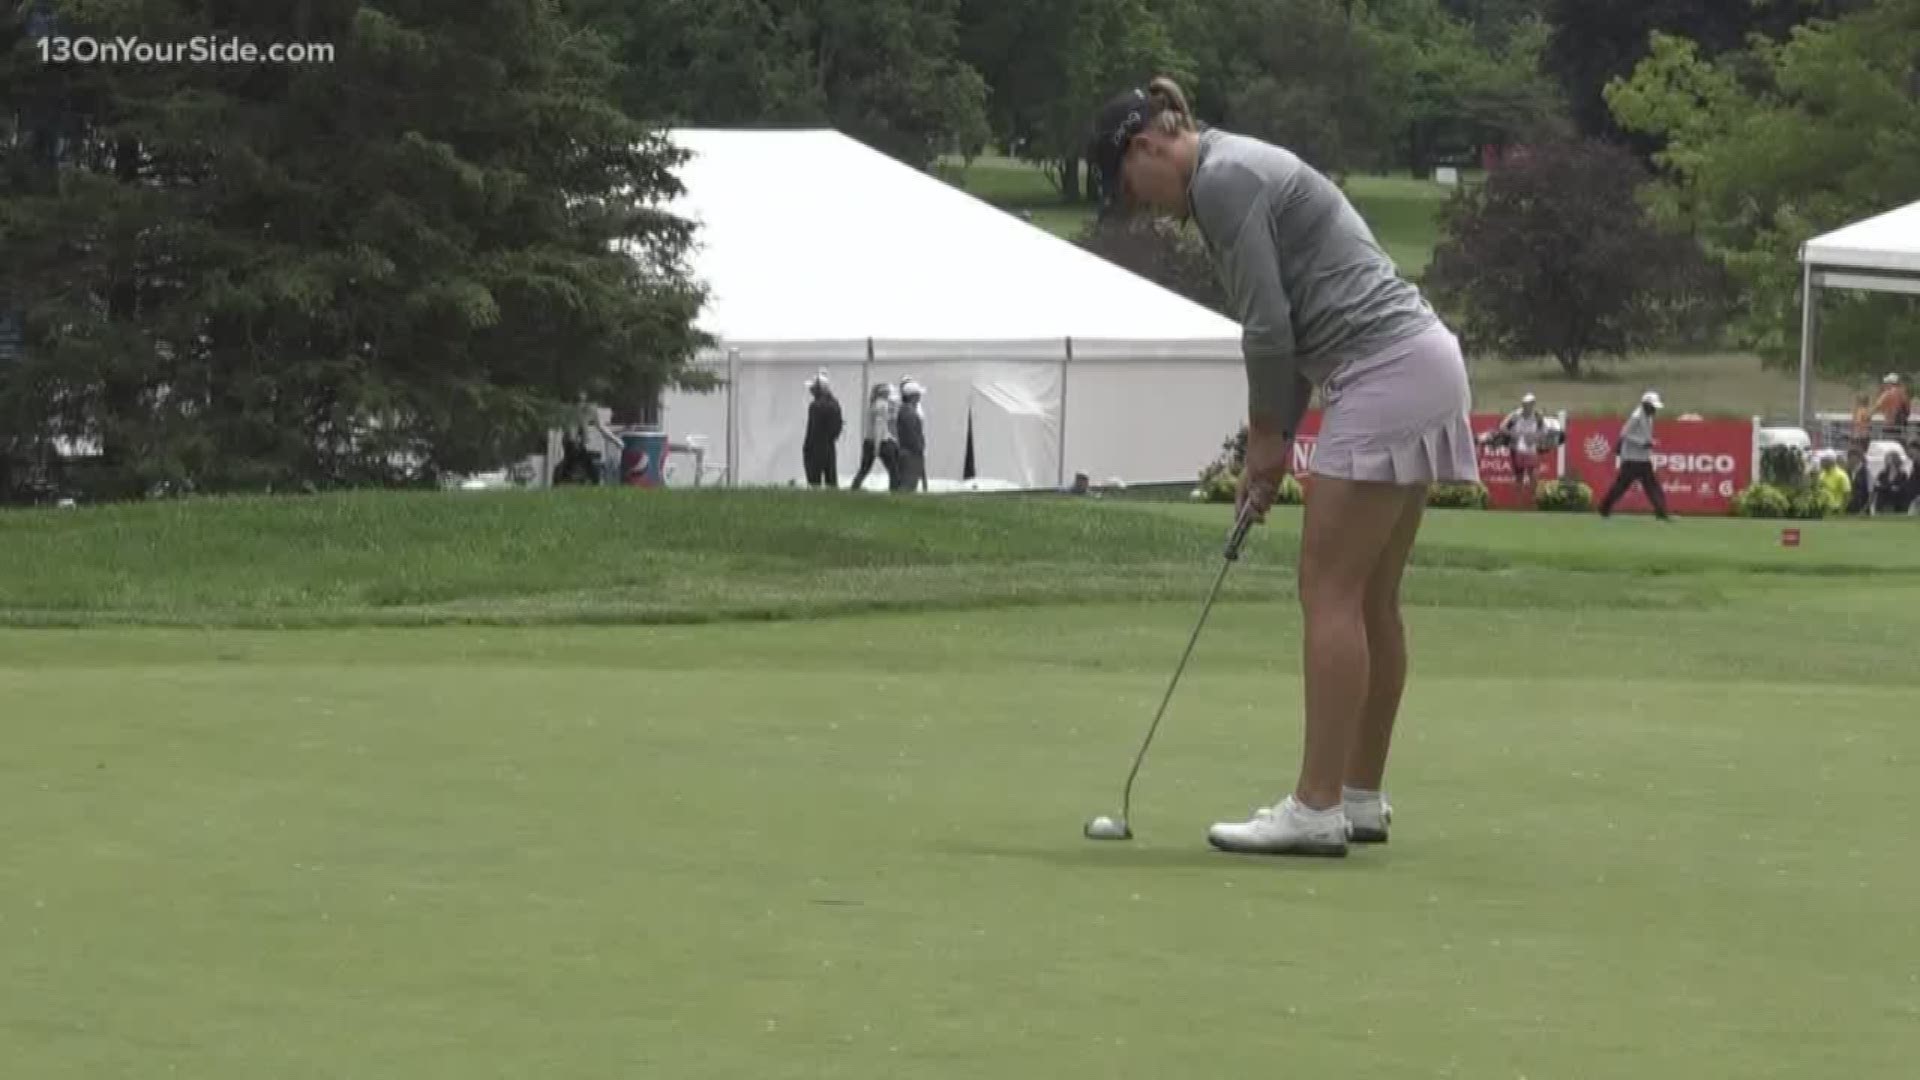 Record-setting round two at LPGA Classic